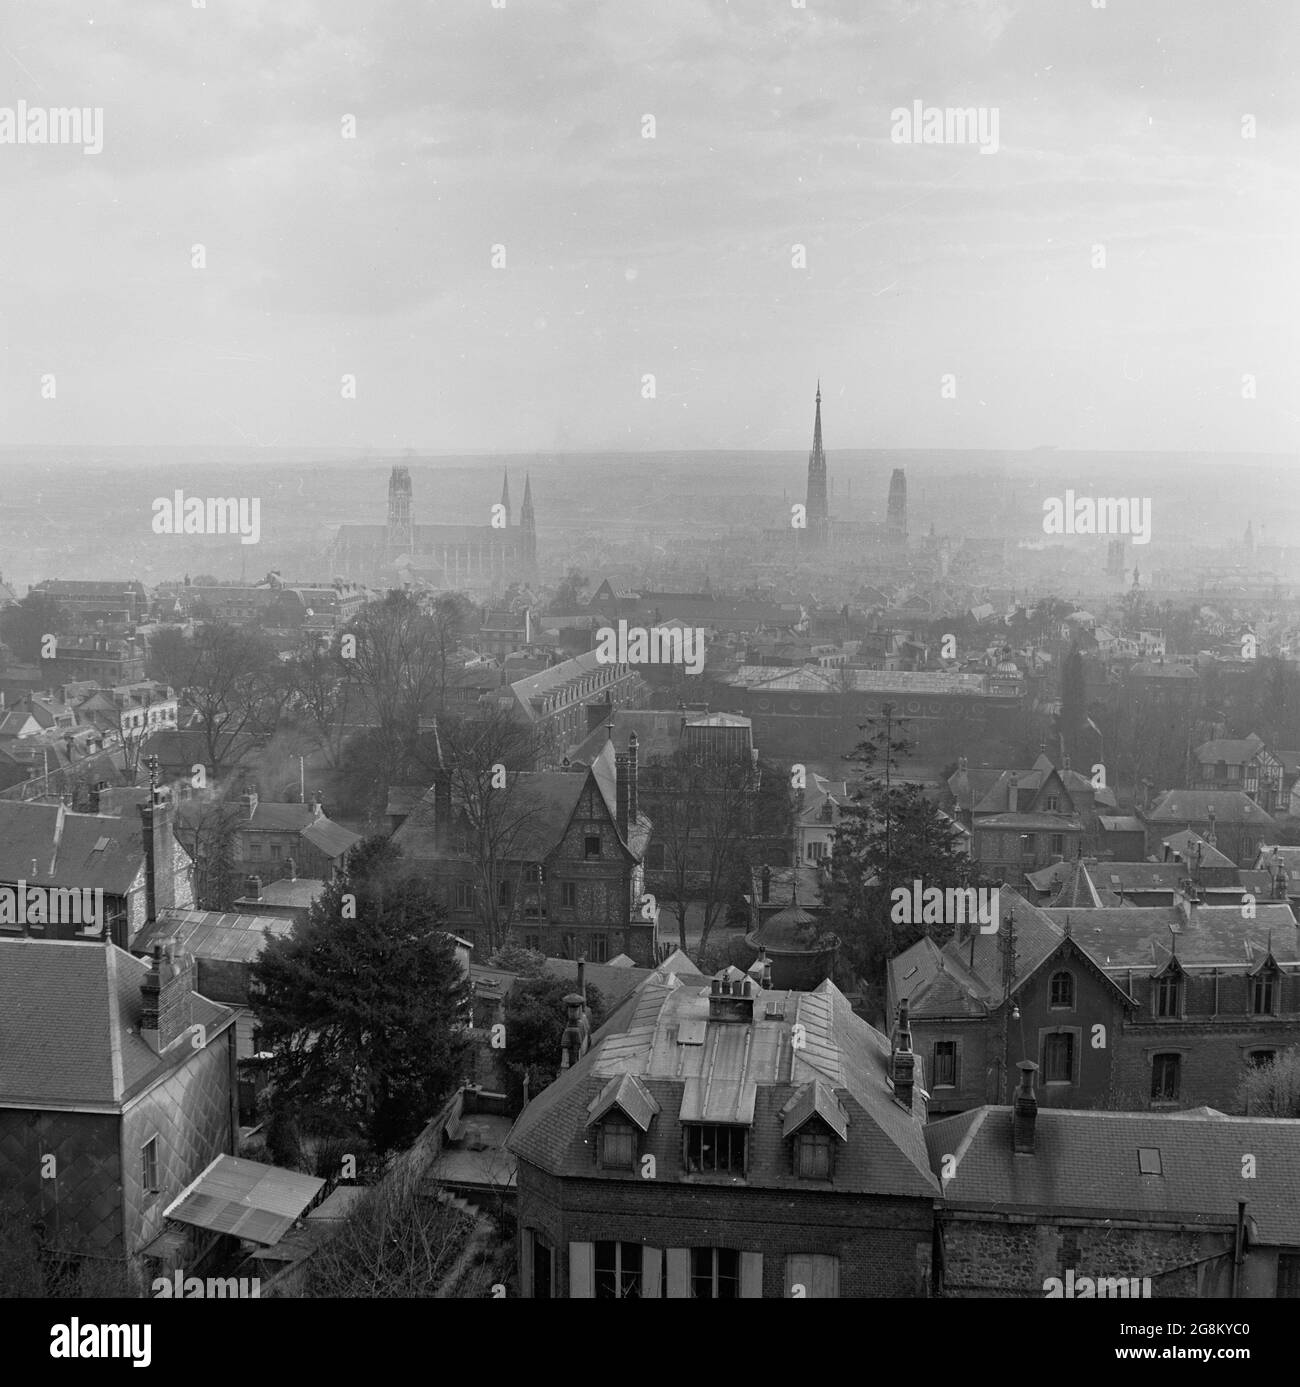 1950s, historical, overhead view of Rouen, France. Stock Photo